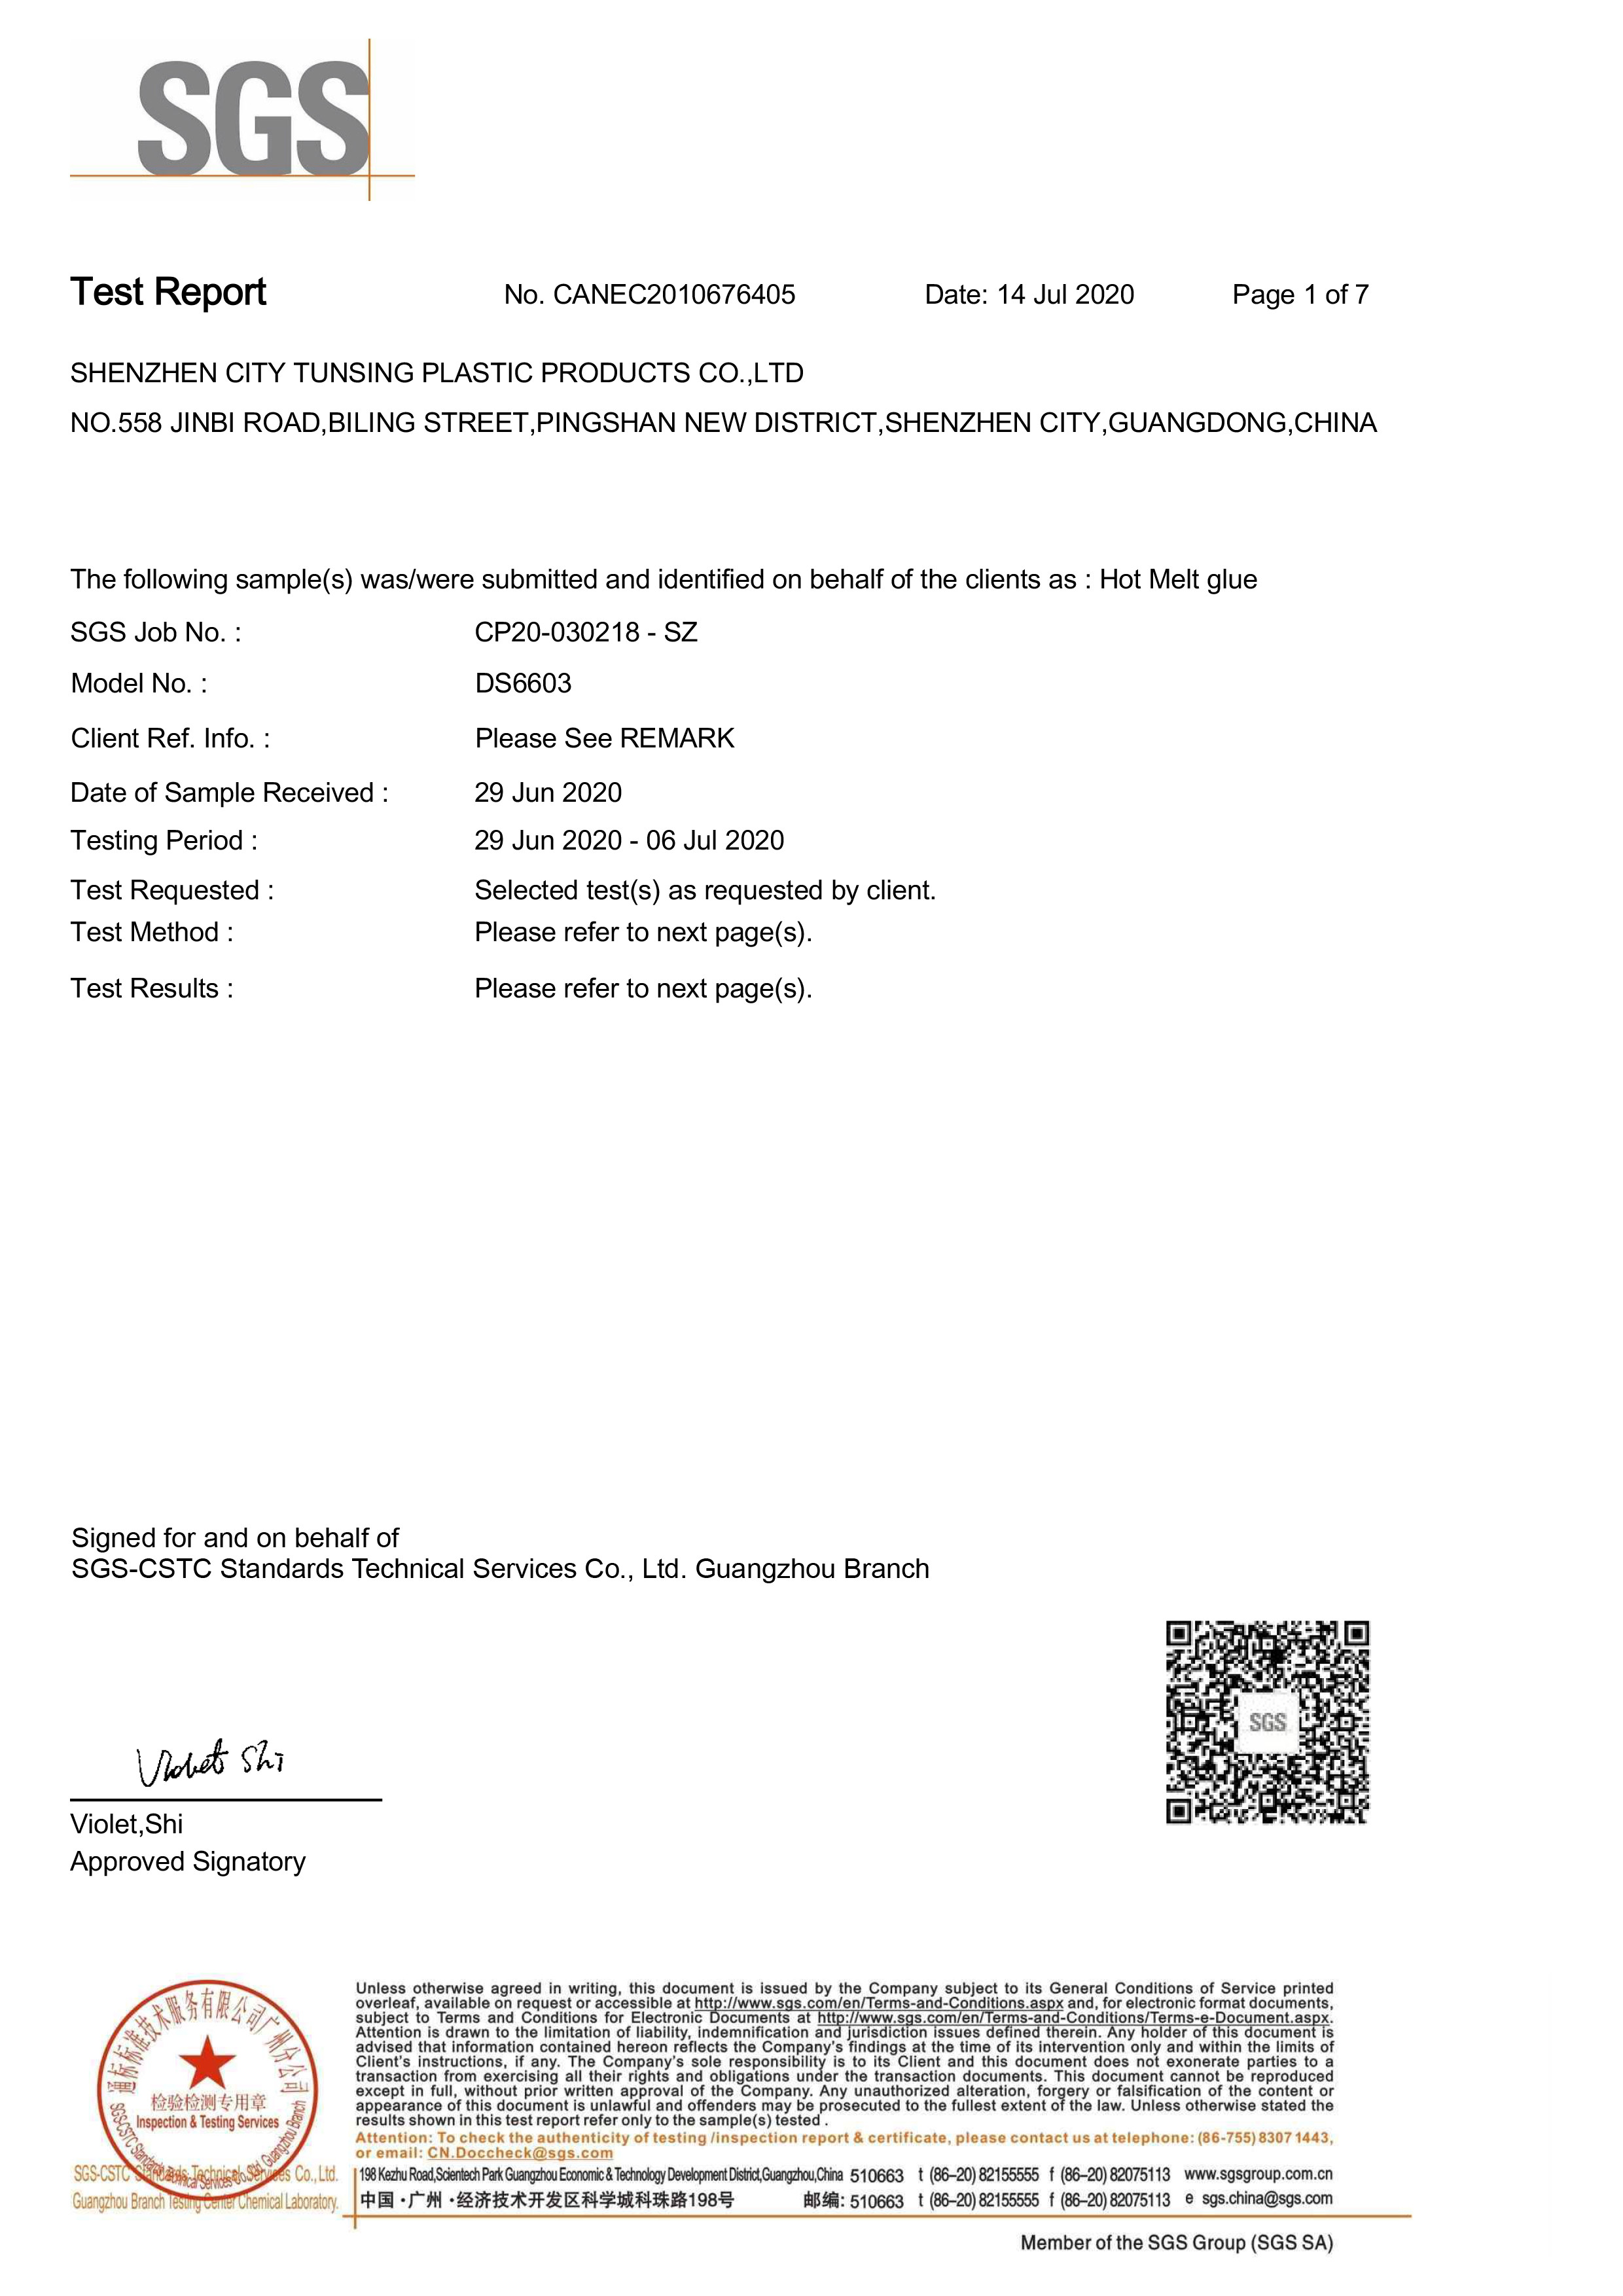 Shenzhen Tunsing Plastic Products Co., Ltd. Certifications